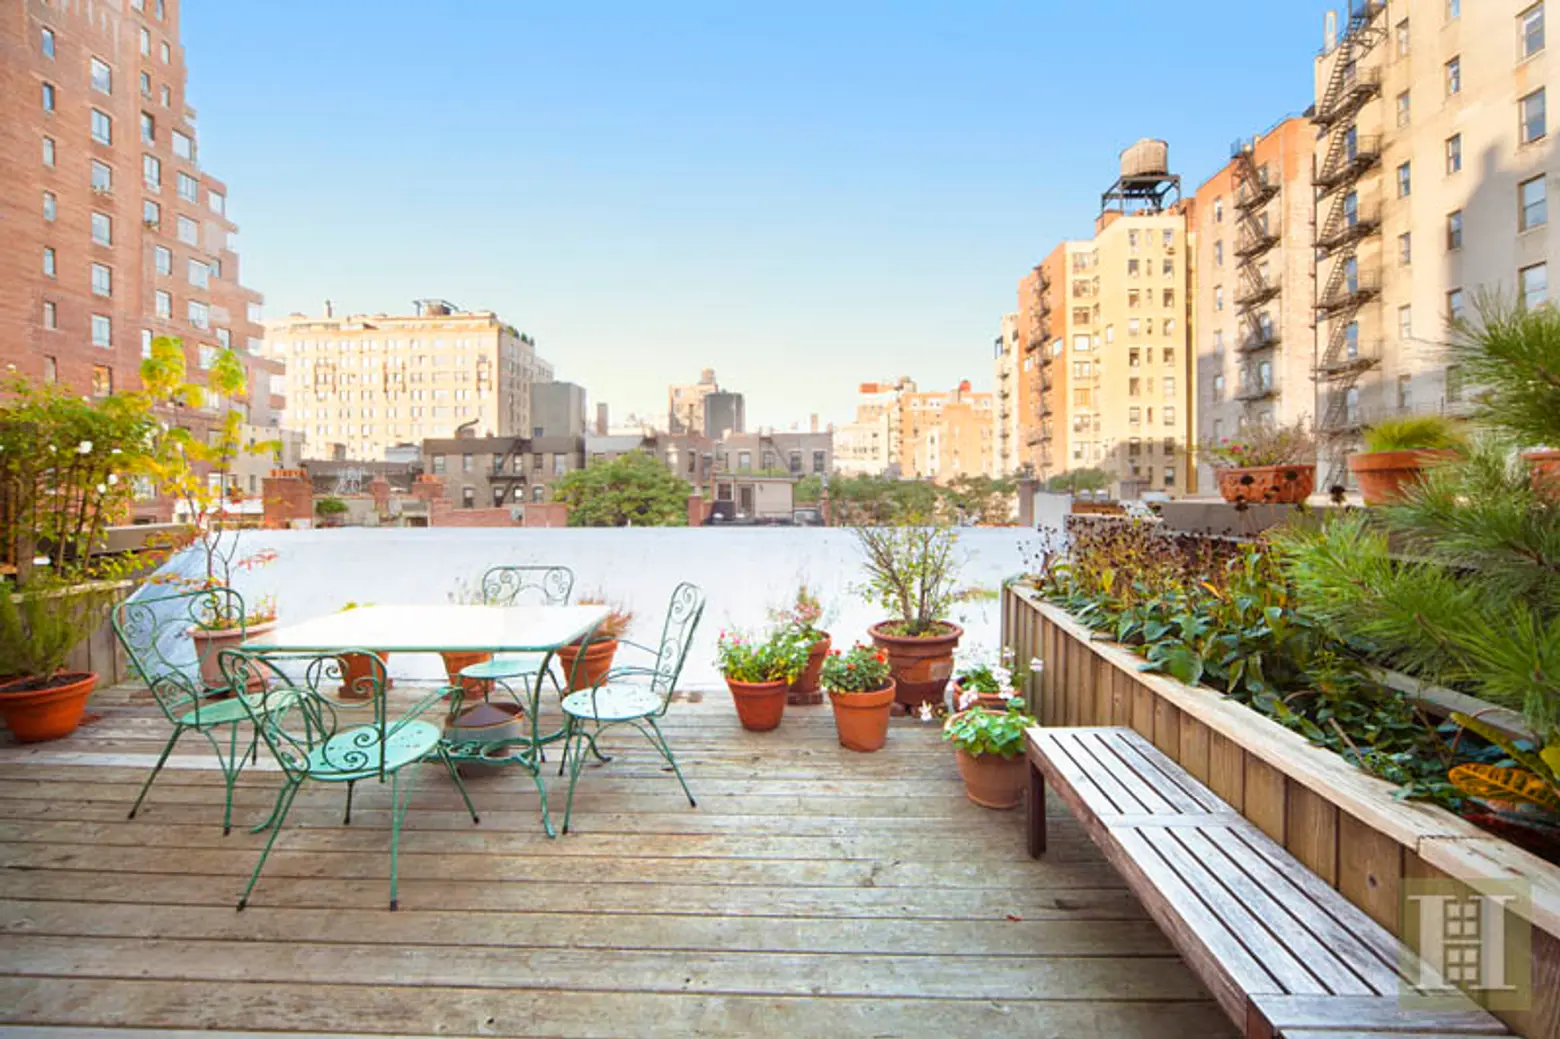 316 West 82nd Street, Riverside Park, old-world touches, roof deck